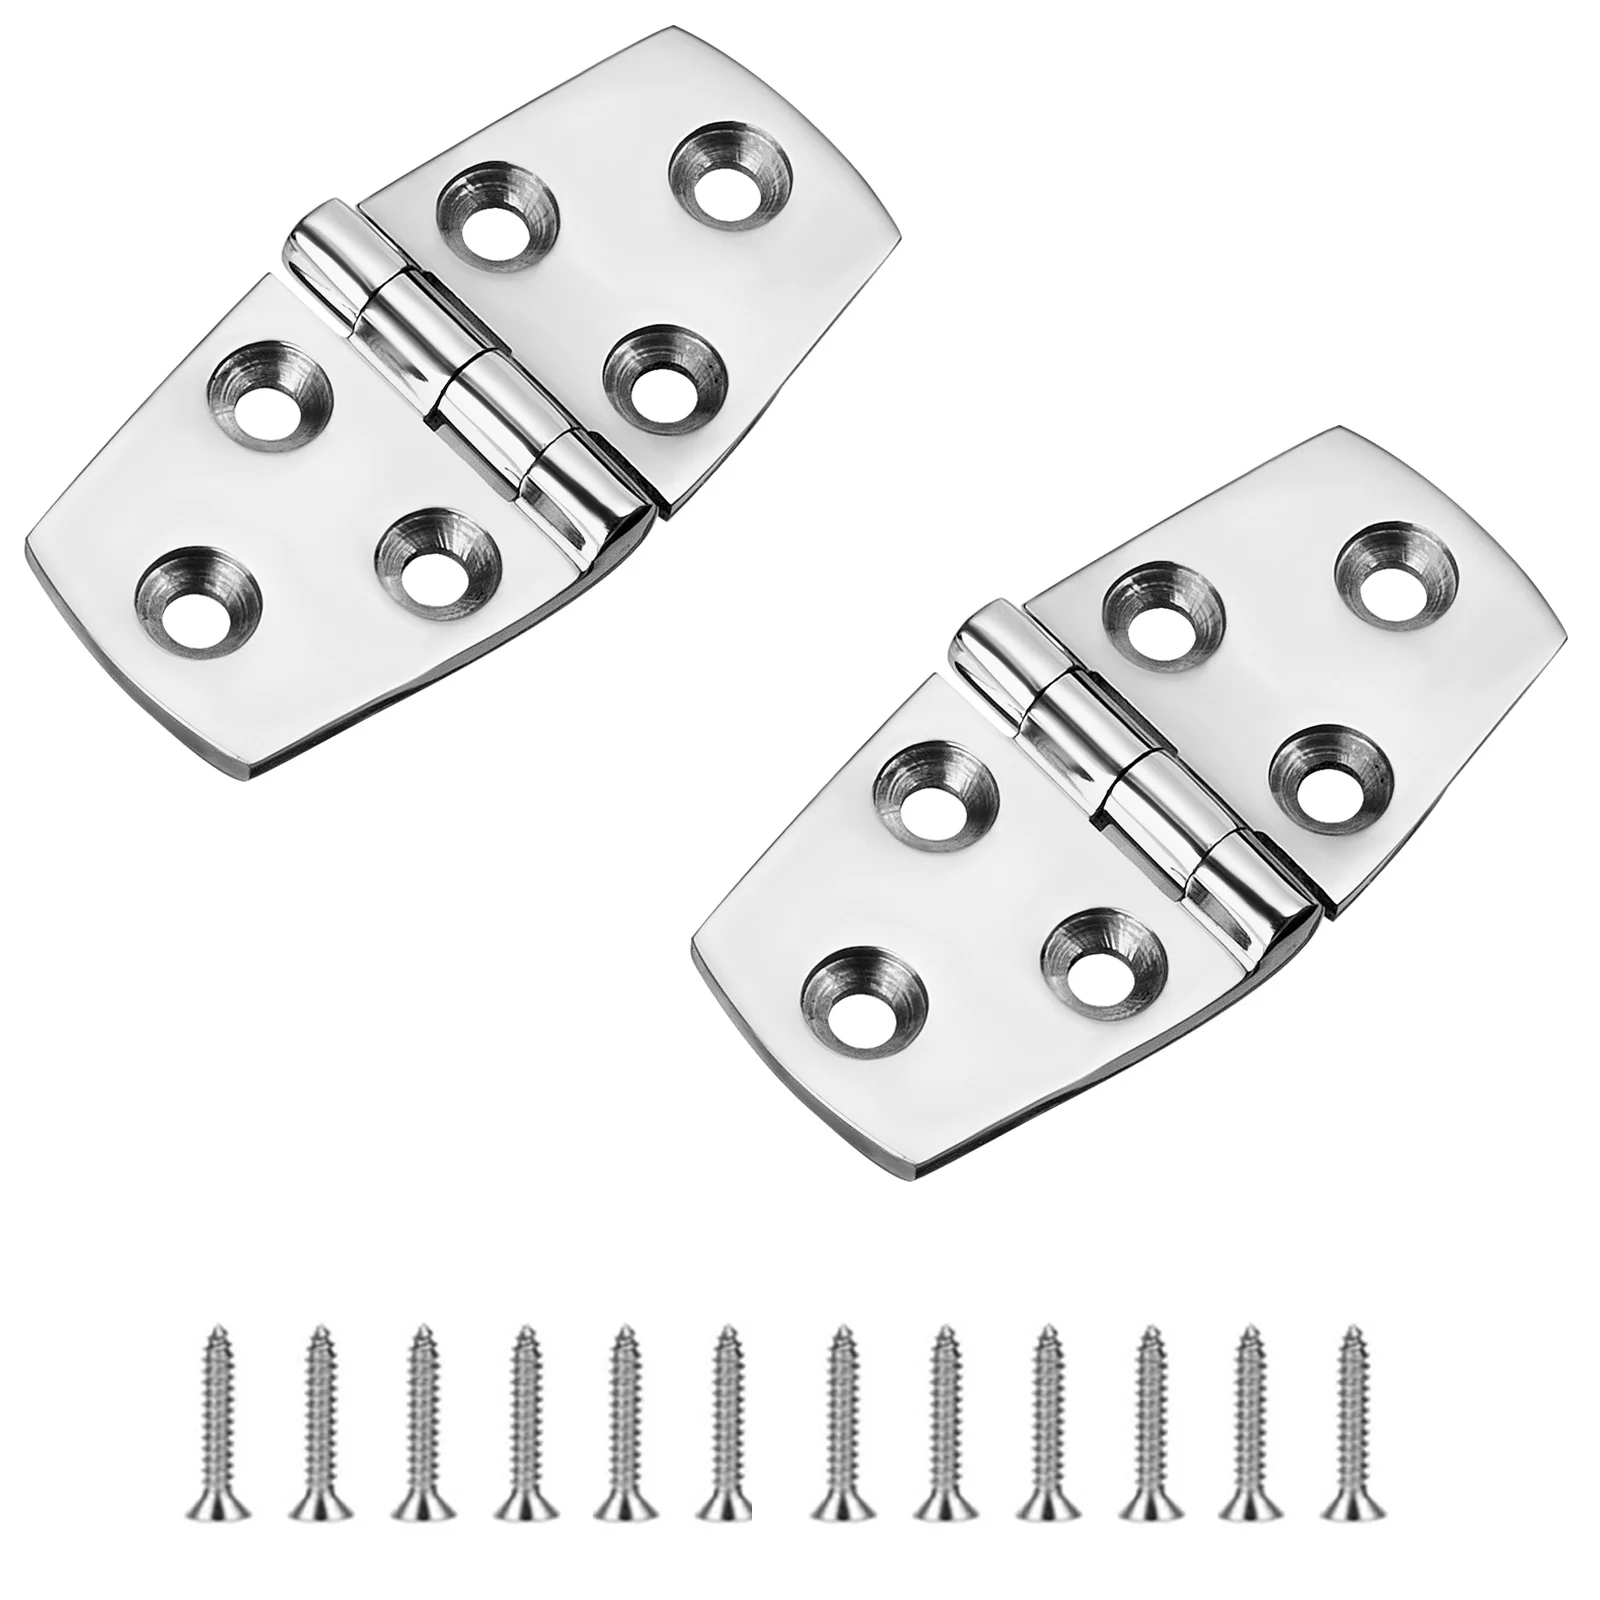 

Boat Hatch Hinges, Marine Hinges Stainless Steel, 3 X 1.5 Inches (76 x 38MM),Heavy Duty 316 Ss with Screws (2 PCS)